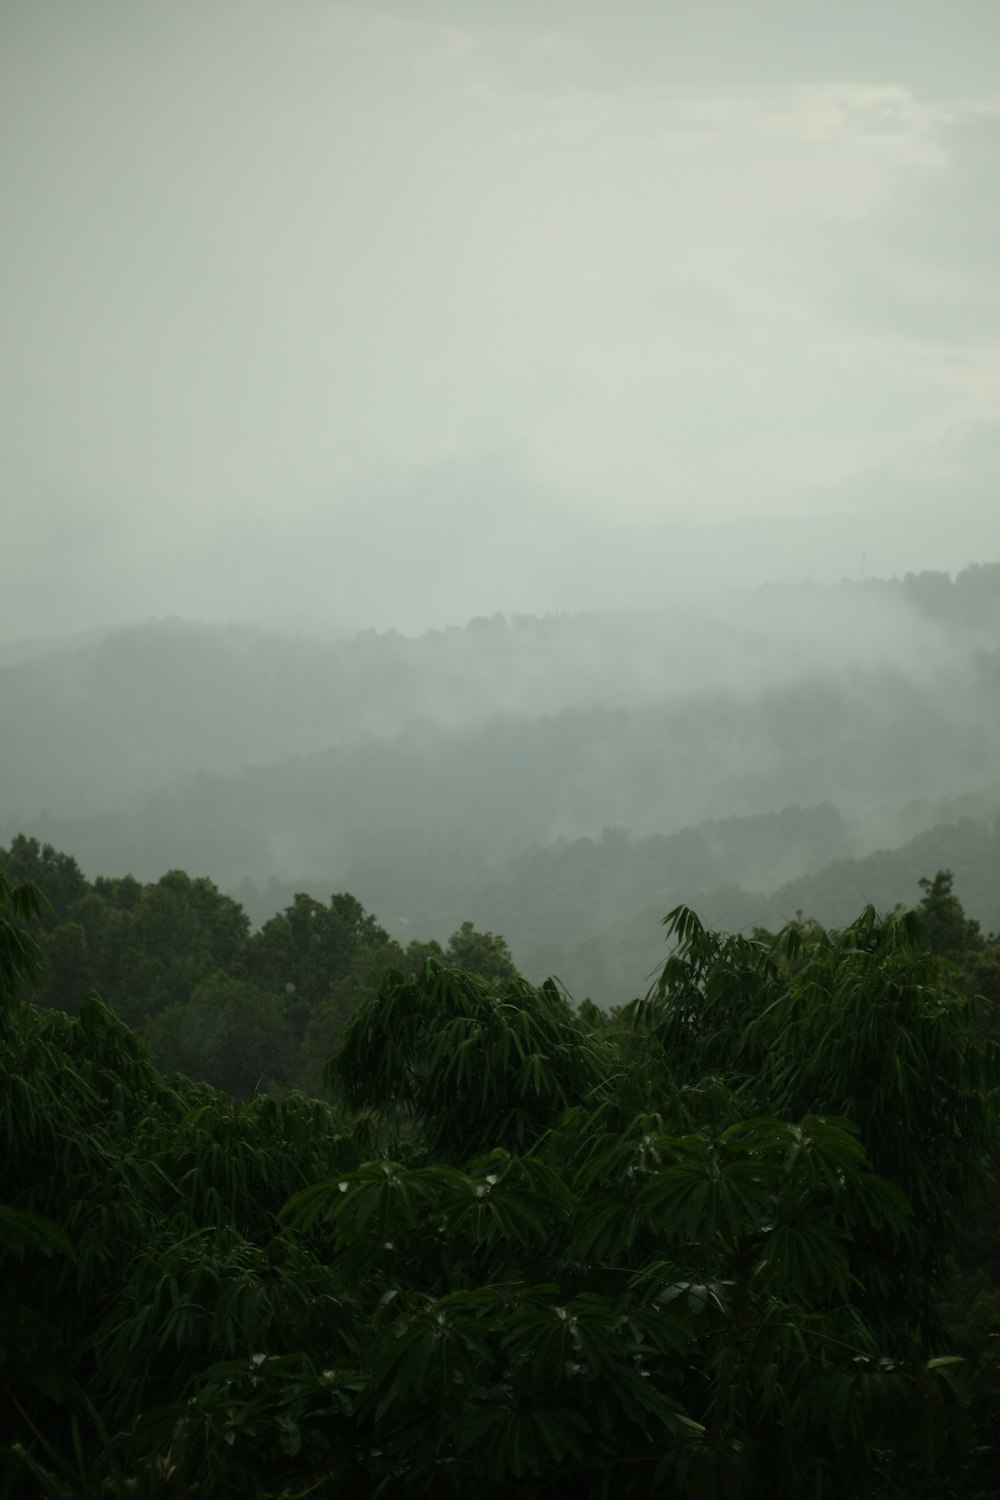 a view of a foggy mountain range with trees in the foreground